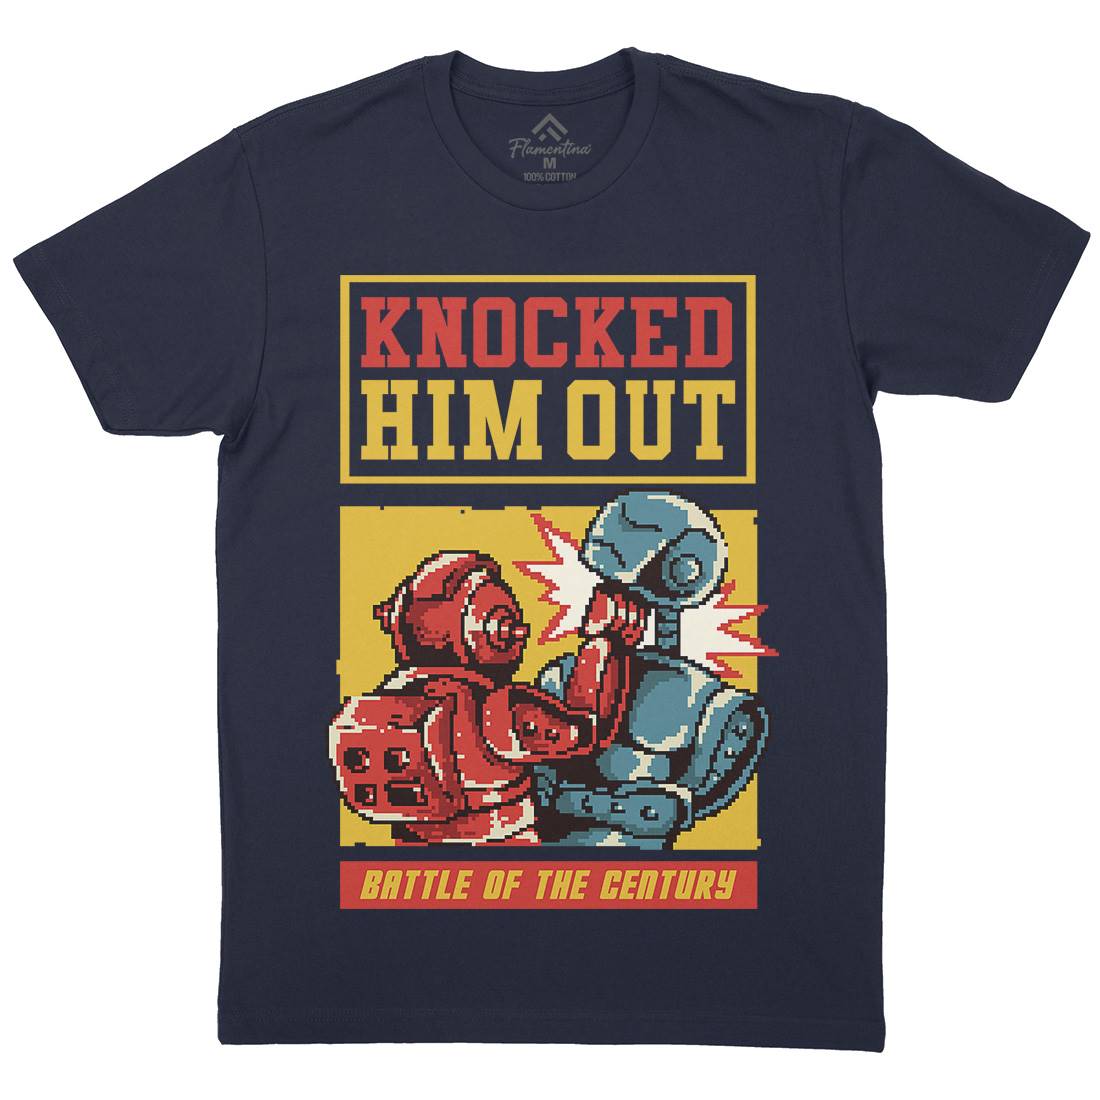 Knocked Him Out Mens Crew Neck T-Shirt Space B923